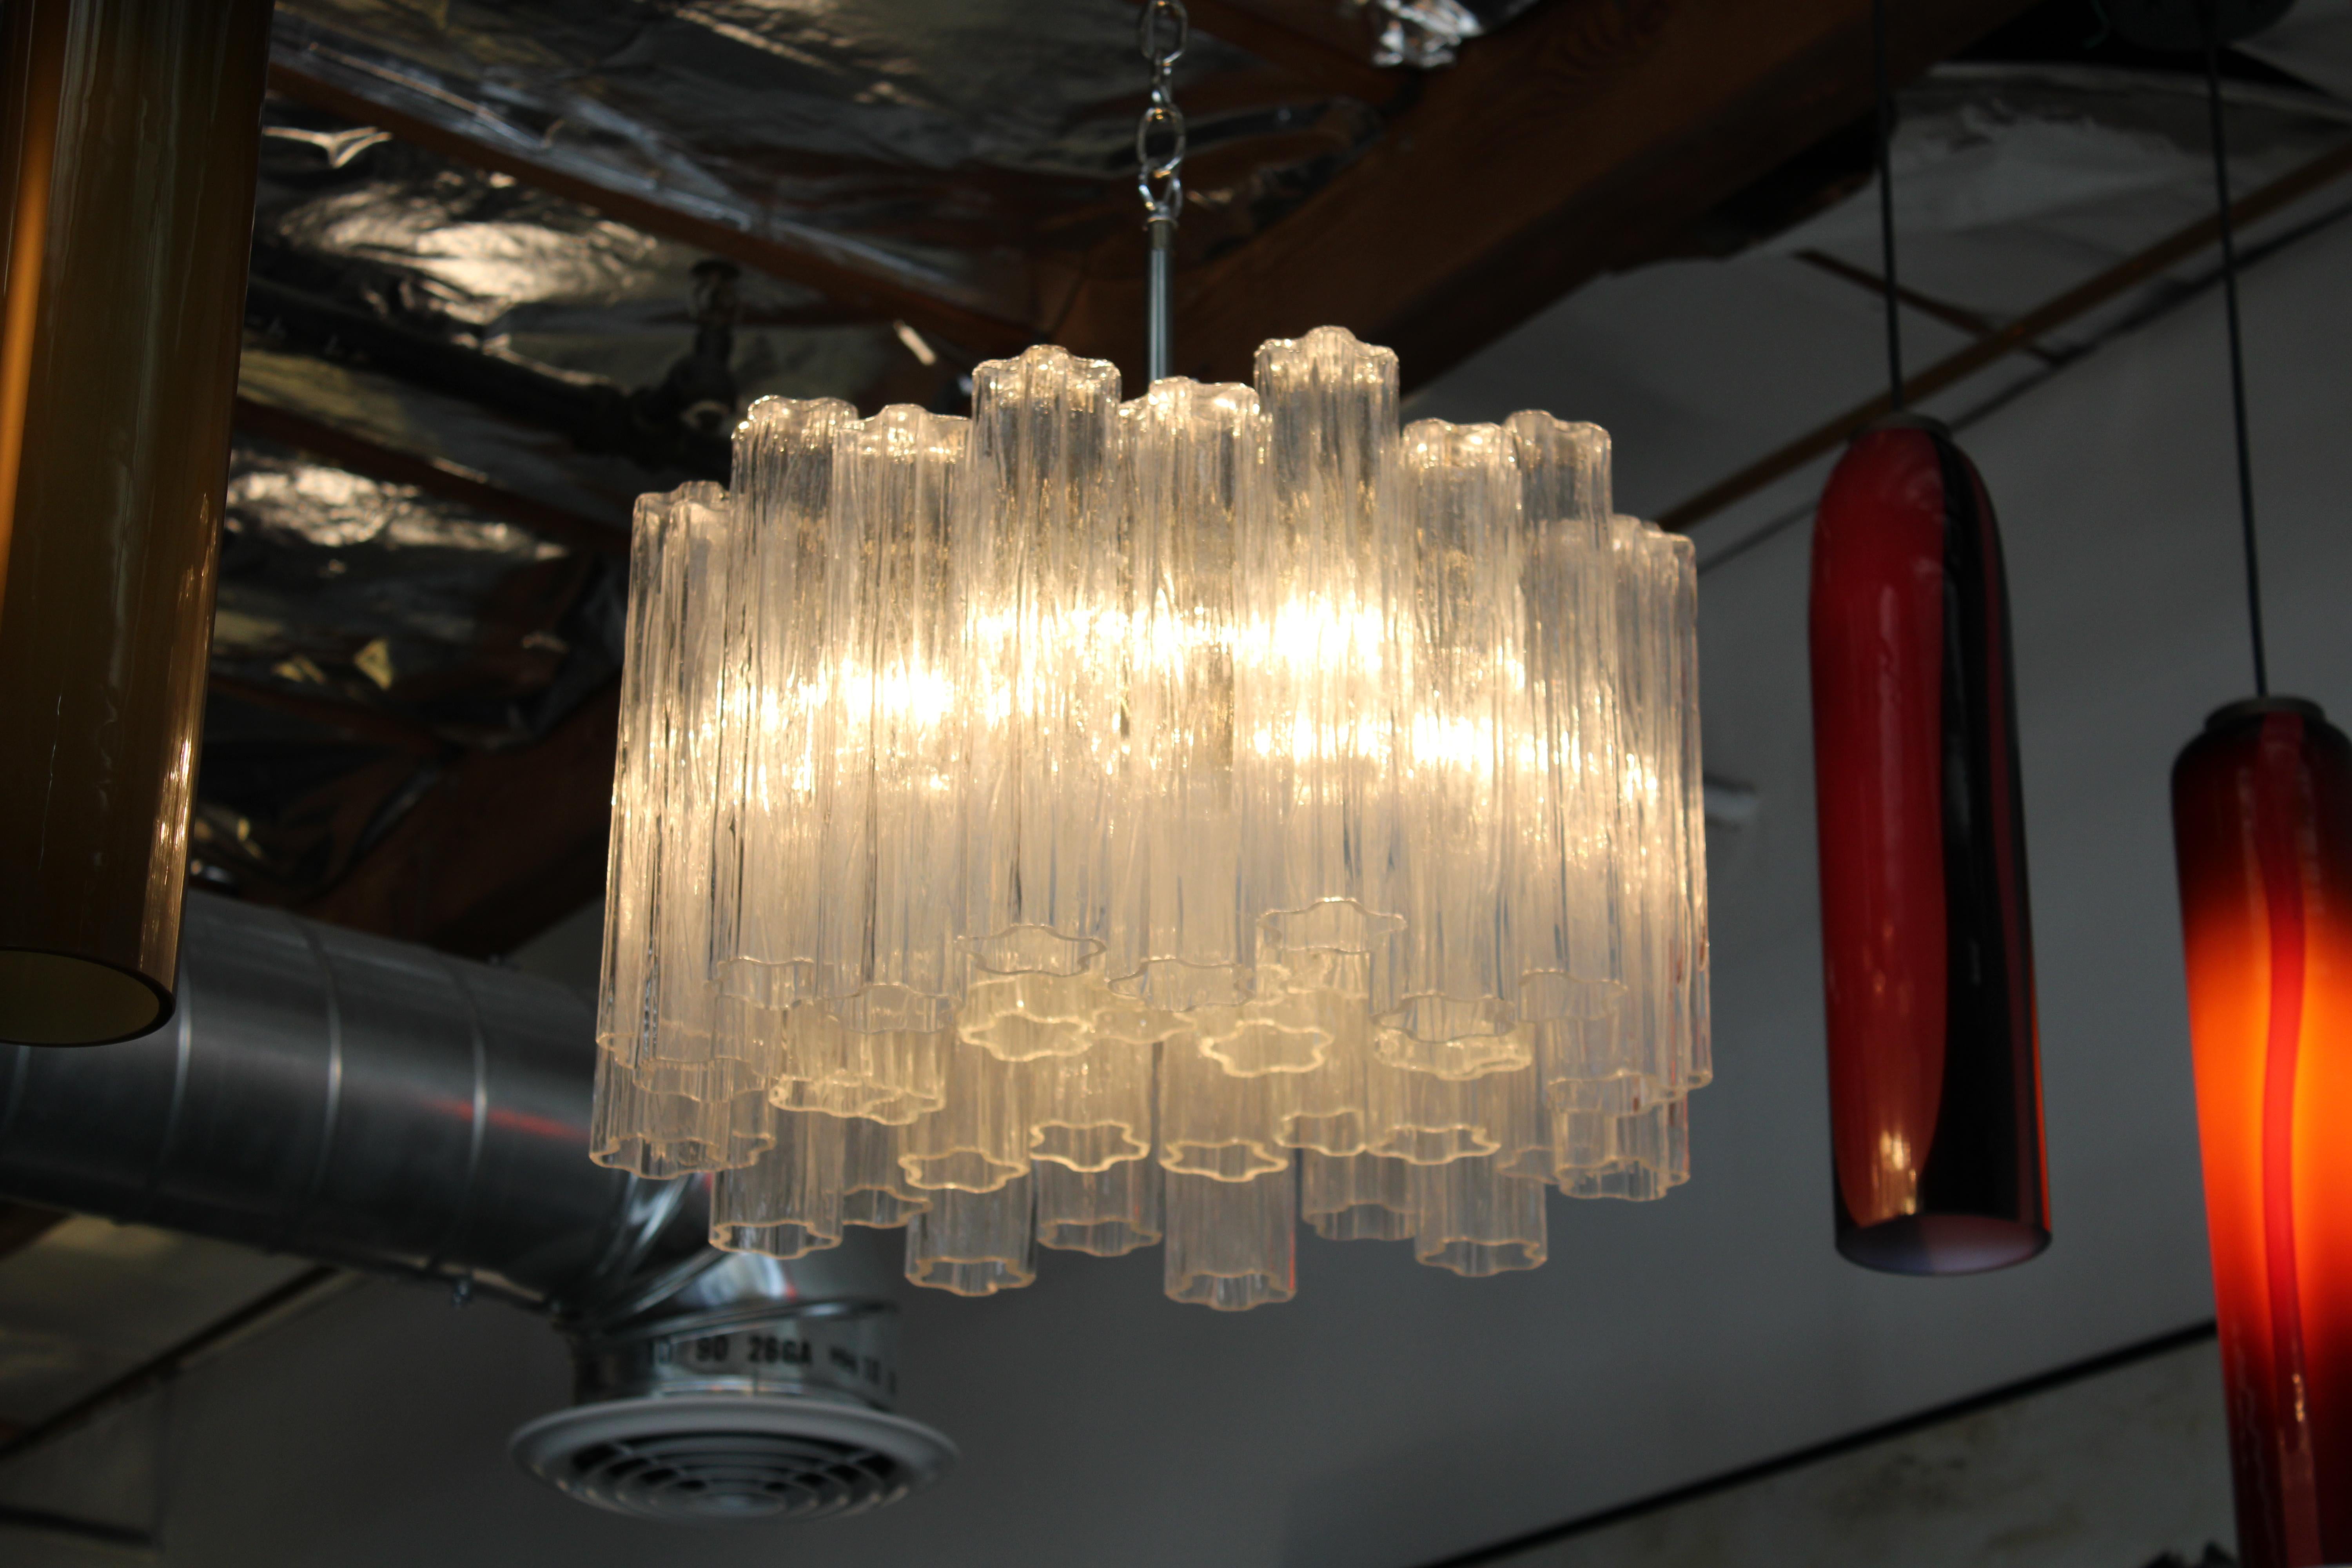 Glass murano chandelier attributed to Venini. There are 22 large glass tubes that fit on the upper support measuring about 12